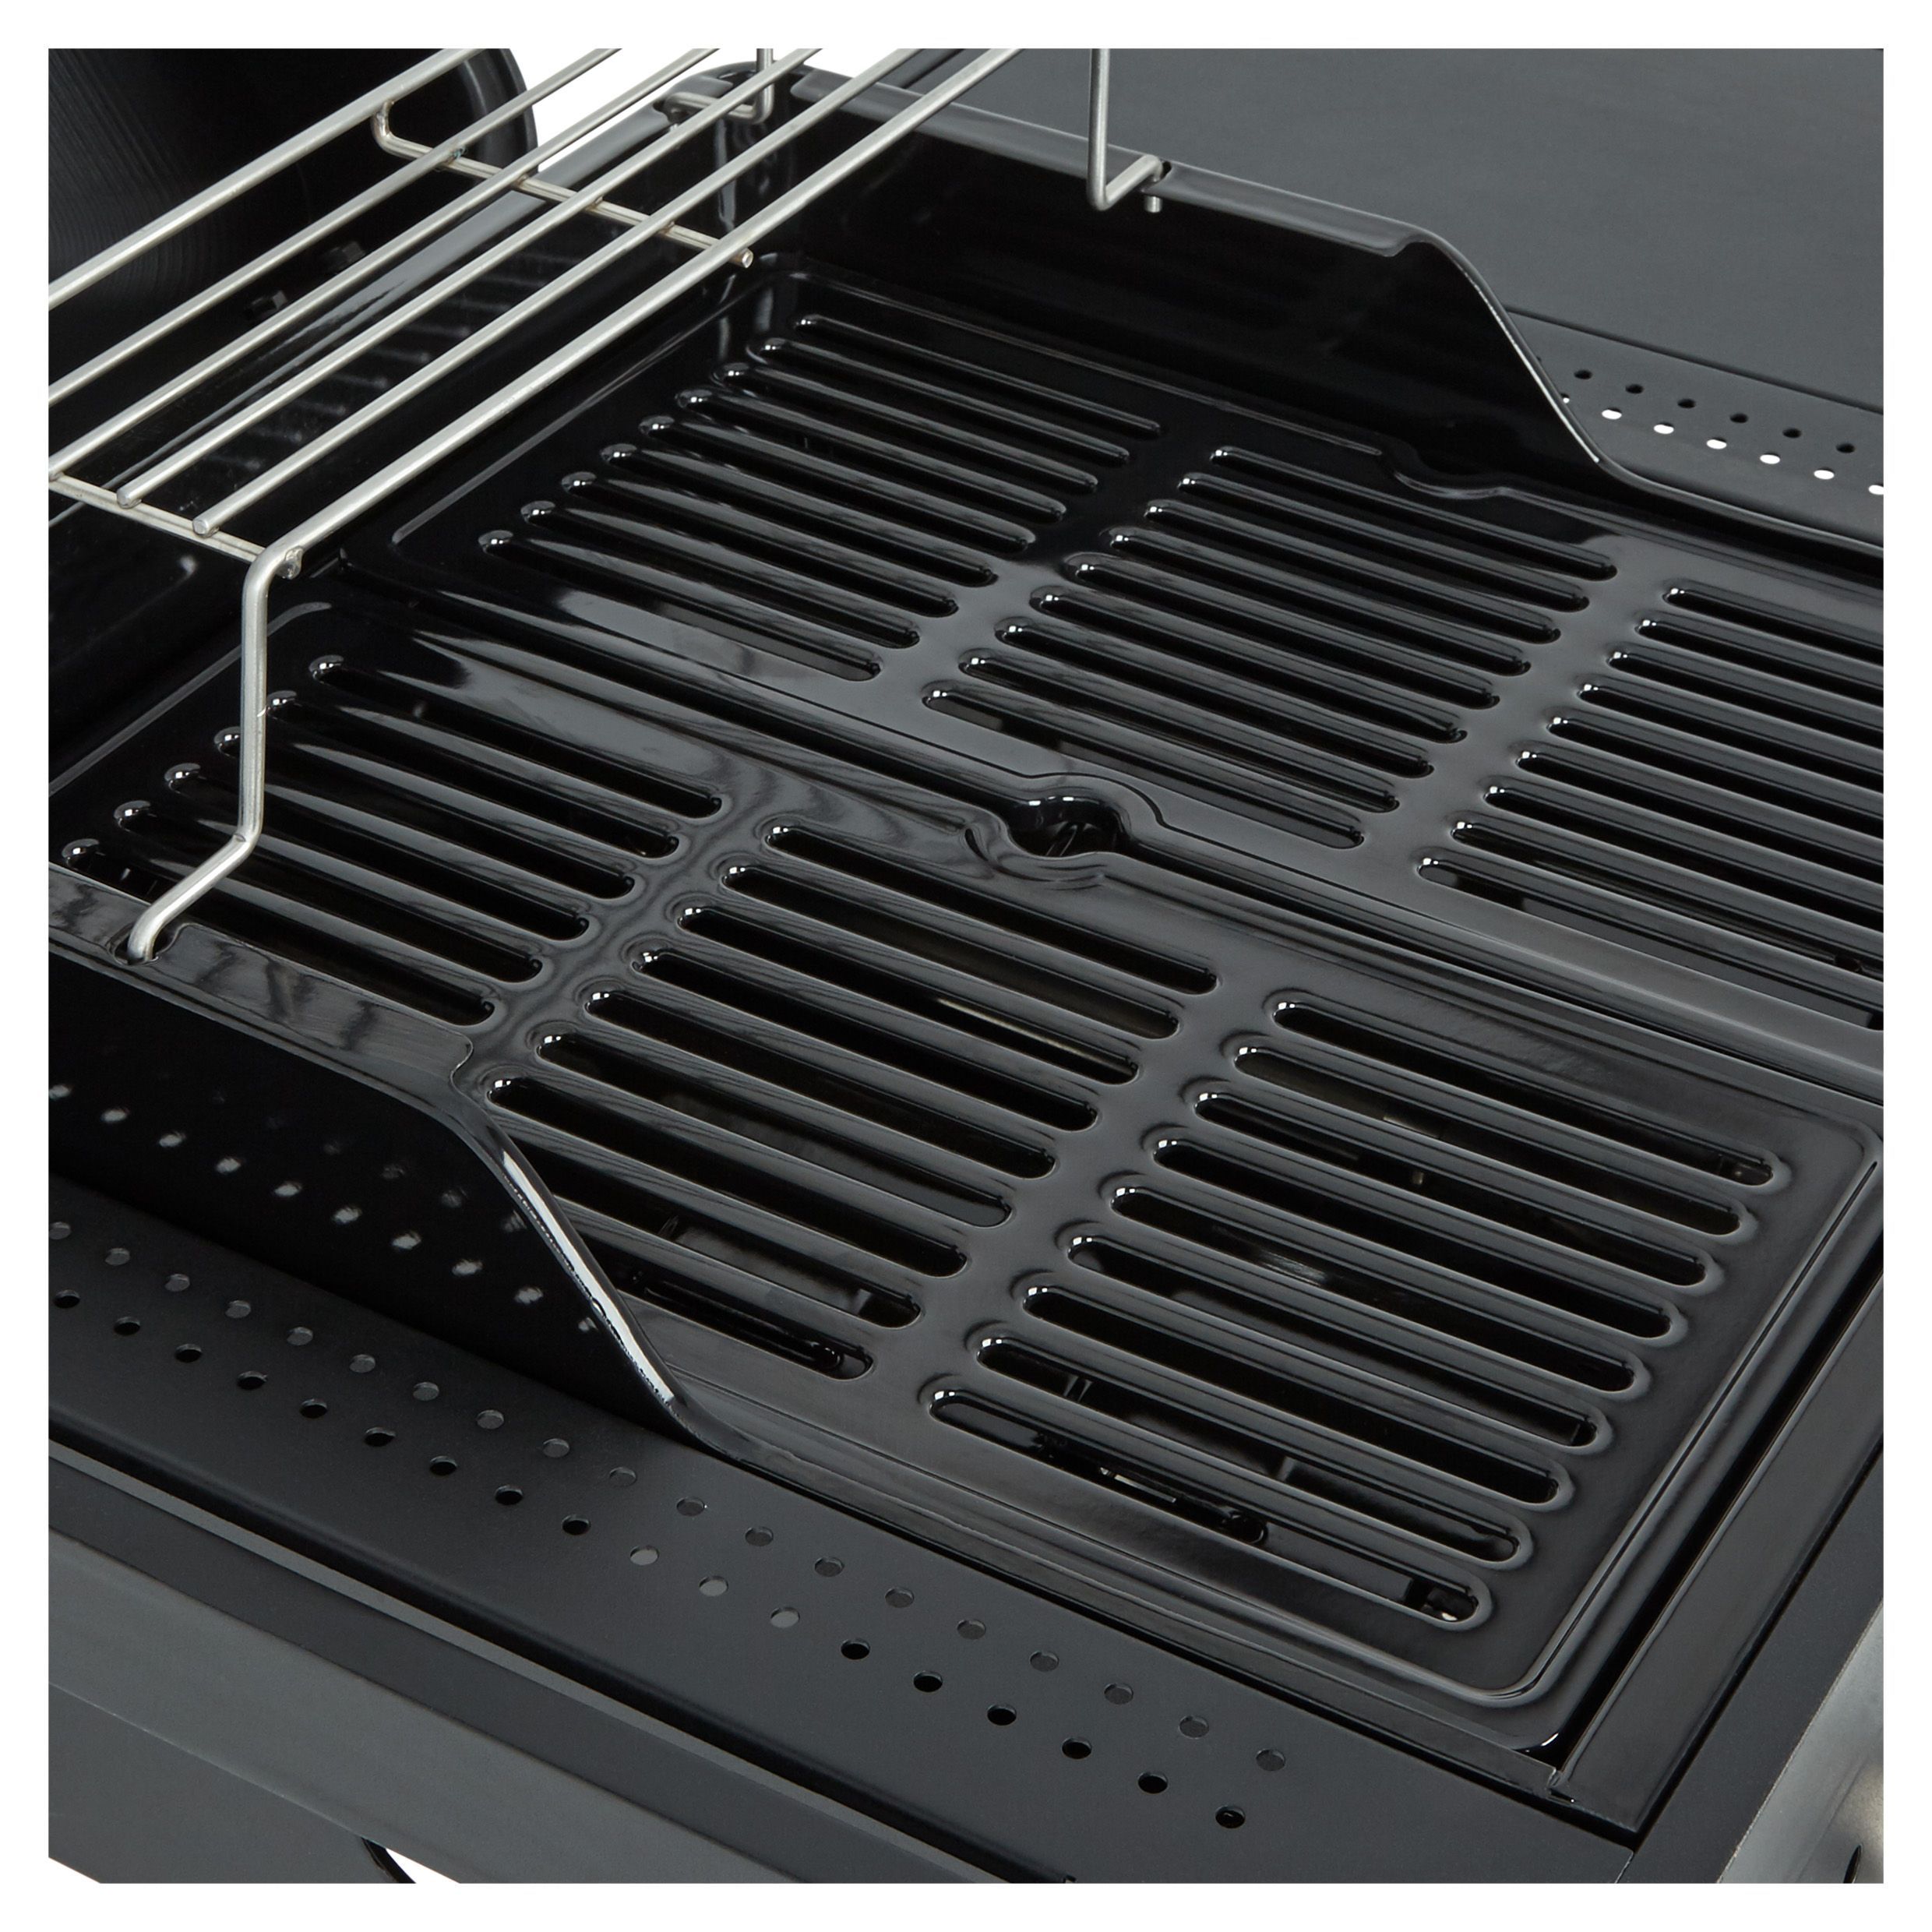 Blooma Rockwell 210 Black 2 burner Gas Barbecue